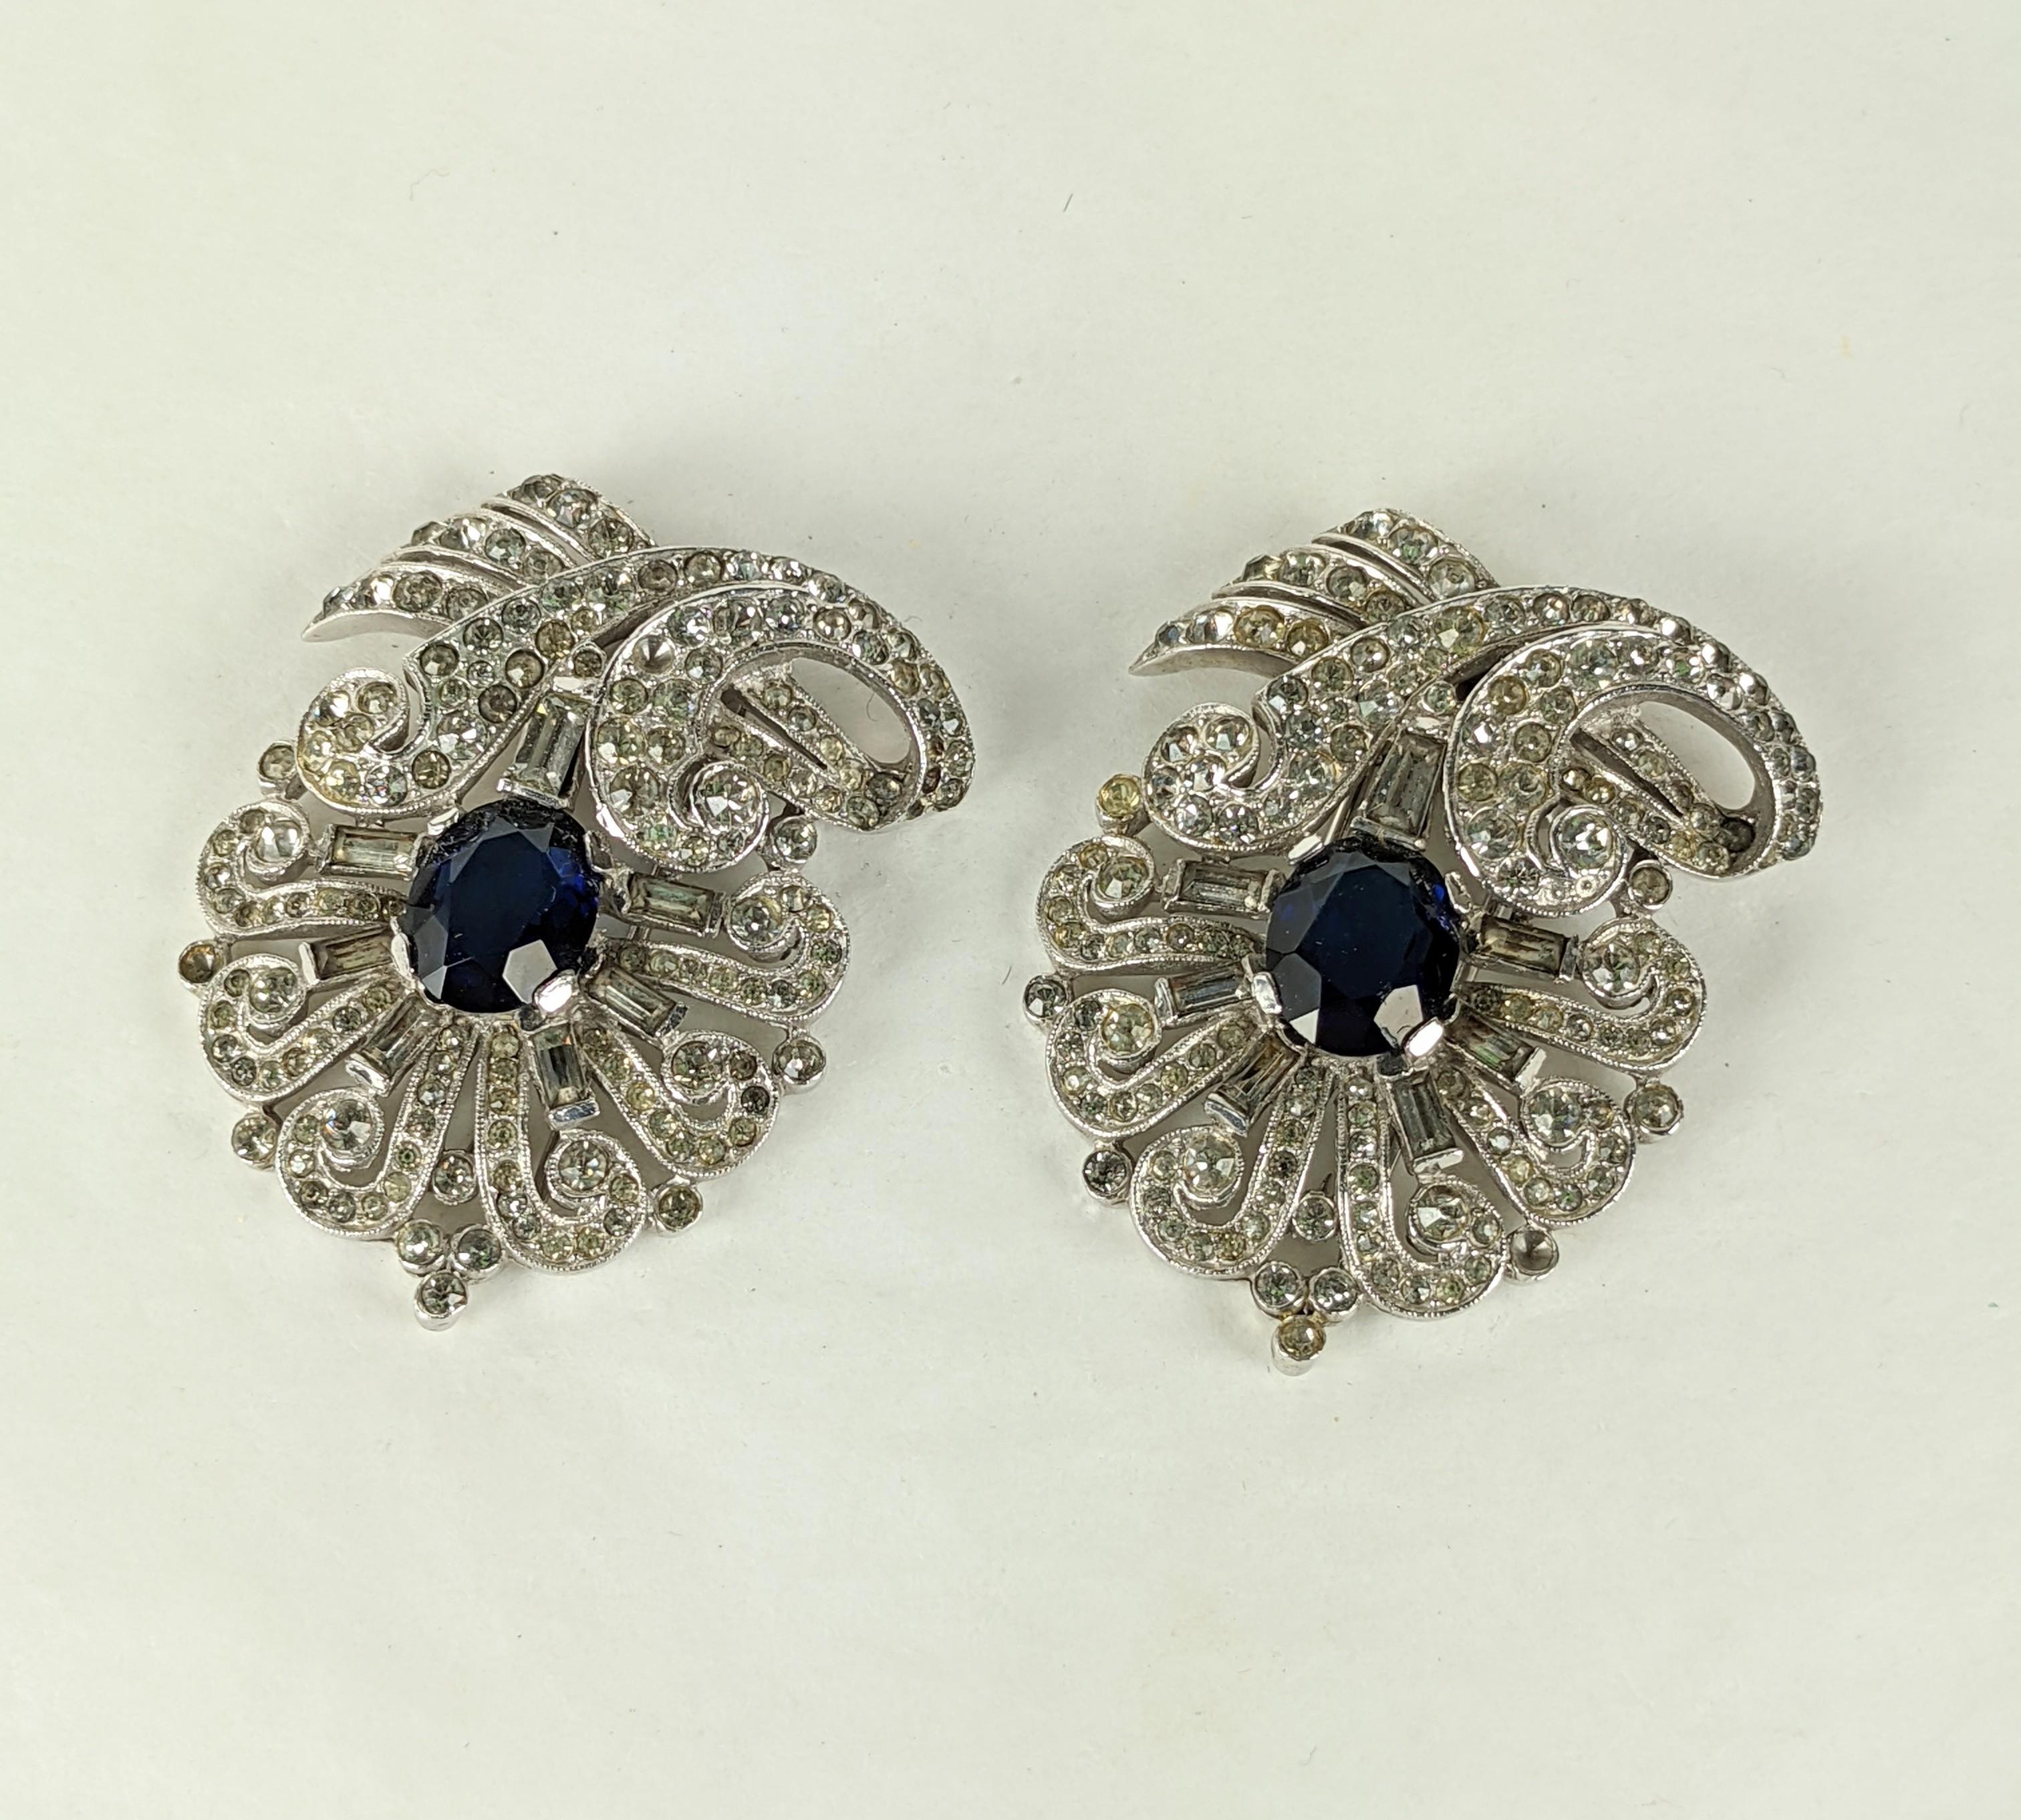 Alfred Philippe for Trifari Art Deco pave and faux sapphire matched pair of dress clips in rhodium plated base metal with crystal rhinestone pave, and faux sapphire oval faceted stones. Marked: Trifari with Crown on the clips, Excellent Condition.
L